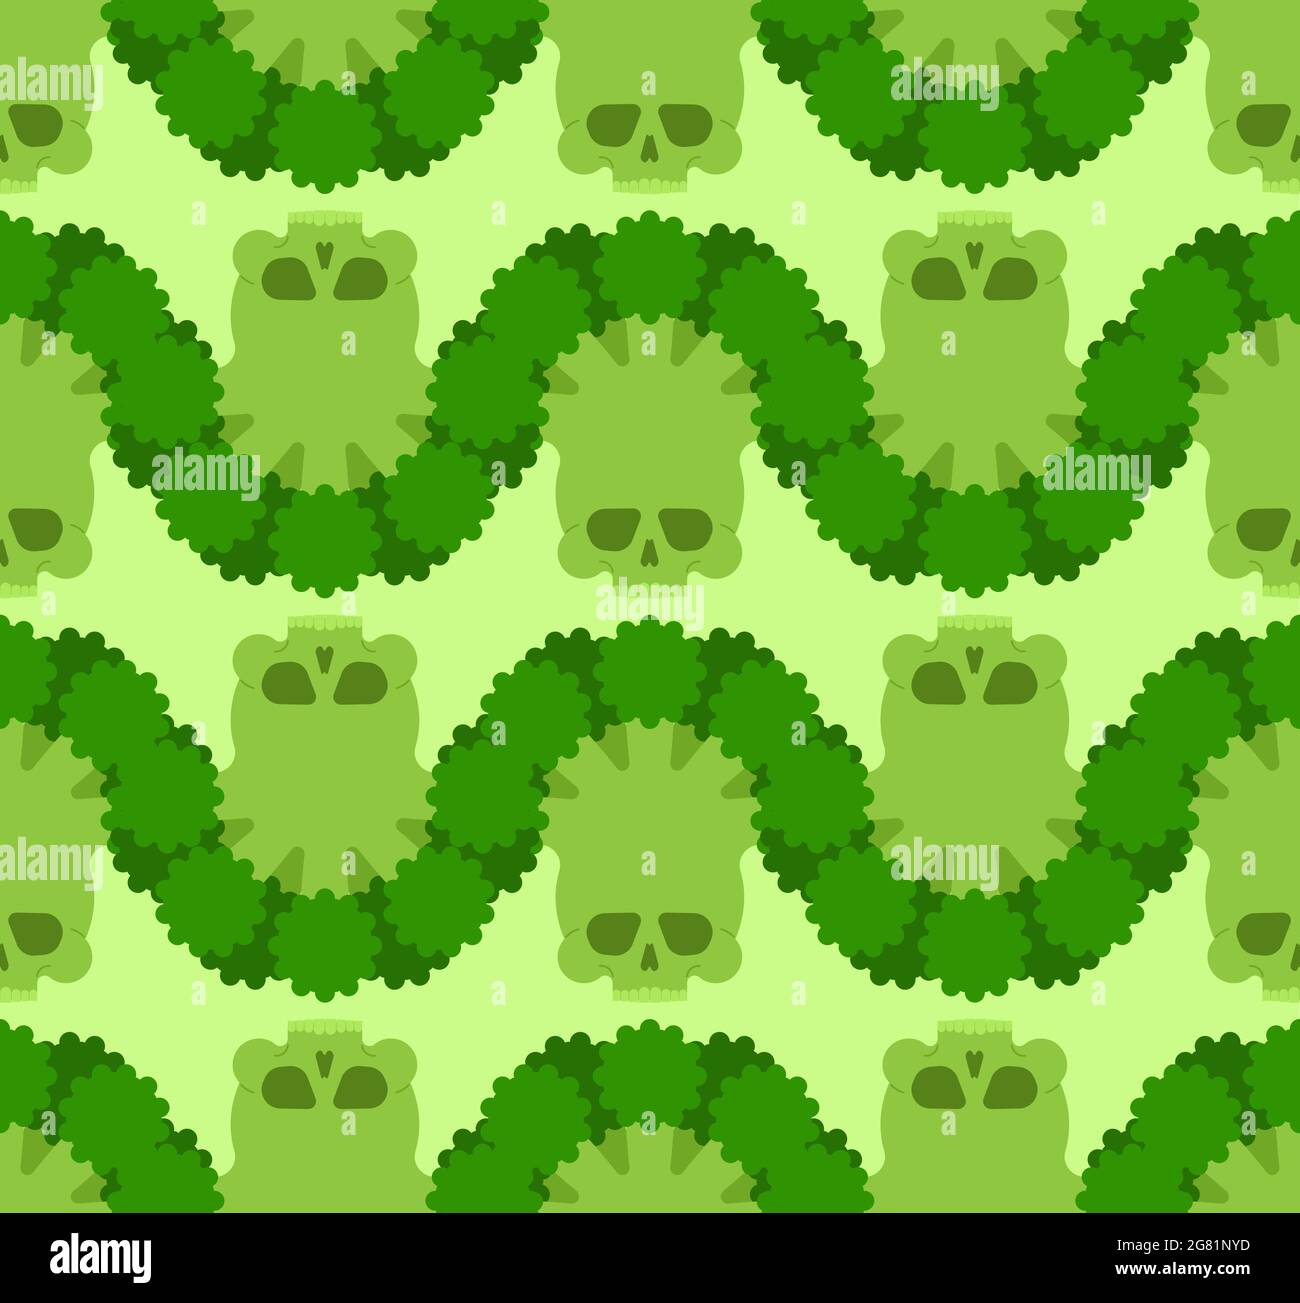 Skull broccoli pattern seamless. Deadly scary vegetable background Stock Vector